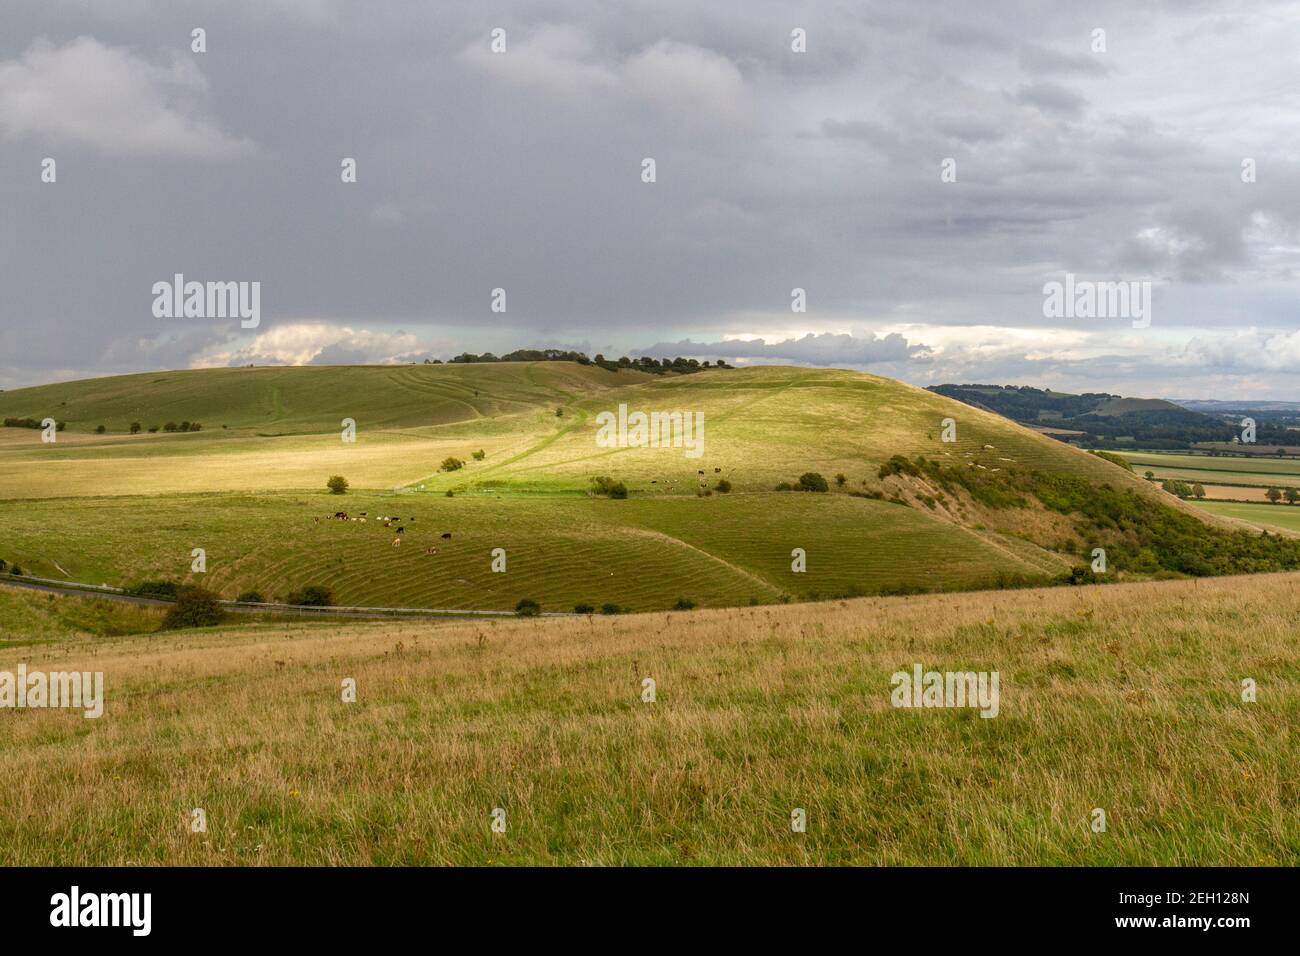 View towards Knap Hill (with a causewayed enclosure, a form of Neolithic earthwork) on Pewsey Downs, Wiltshire, UK. Stock Photo